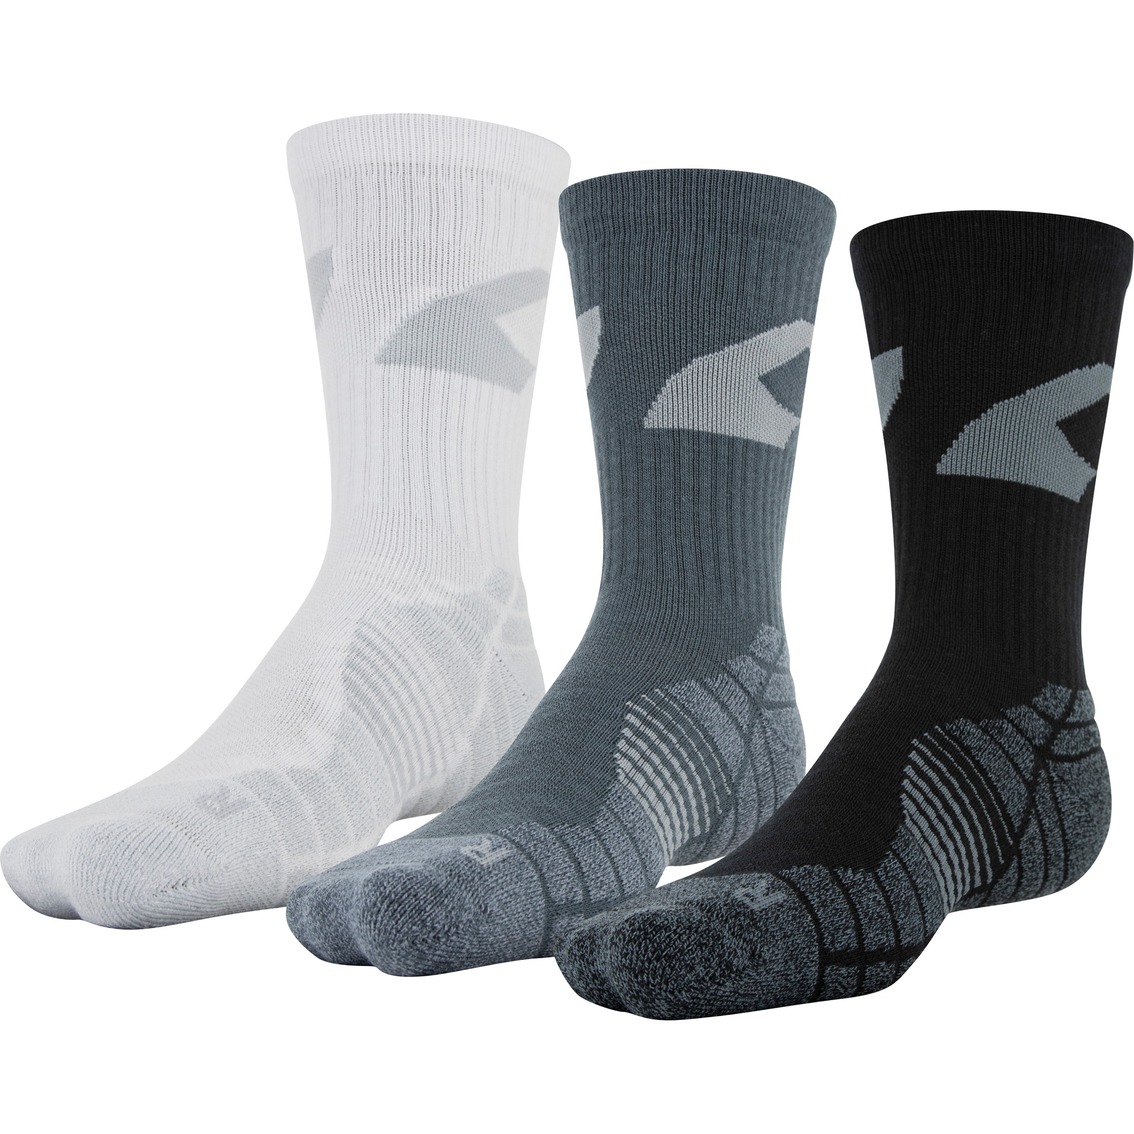 Under Armour Men's Elevated Novelty Crew Sock Pack 3 | Socks | Clothing ...